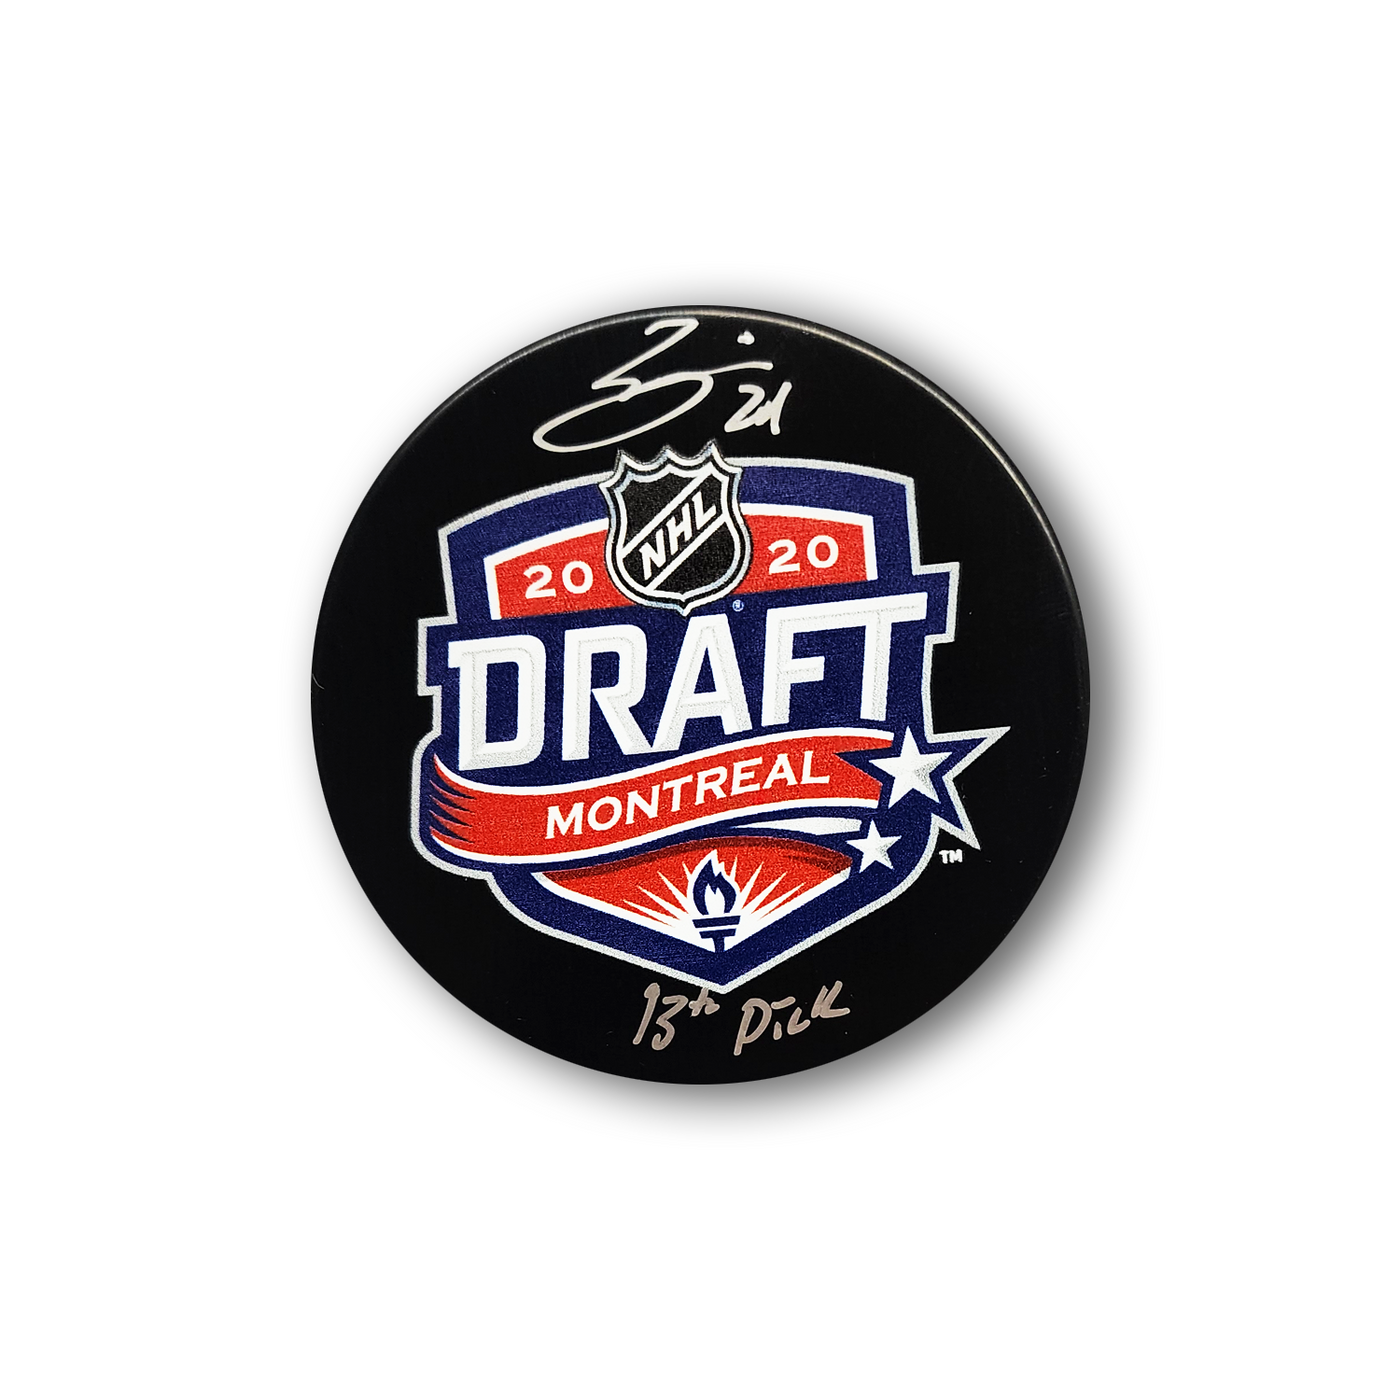 Seth Jarvis Autographed 2020 NHL Draft Hockey Puck Inscribed 13th Pick